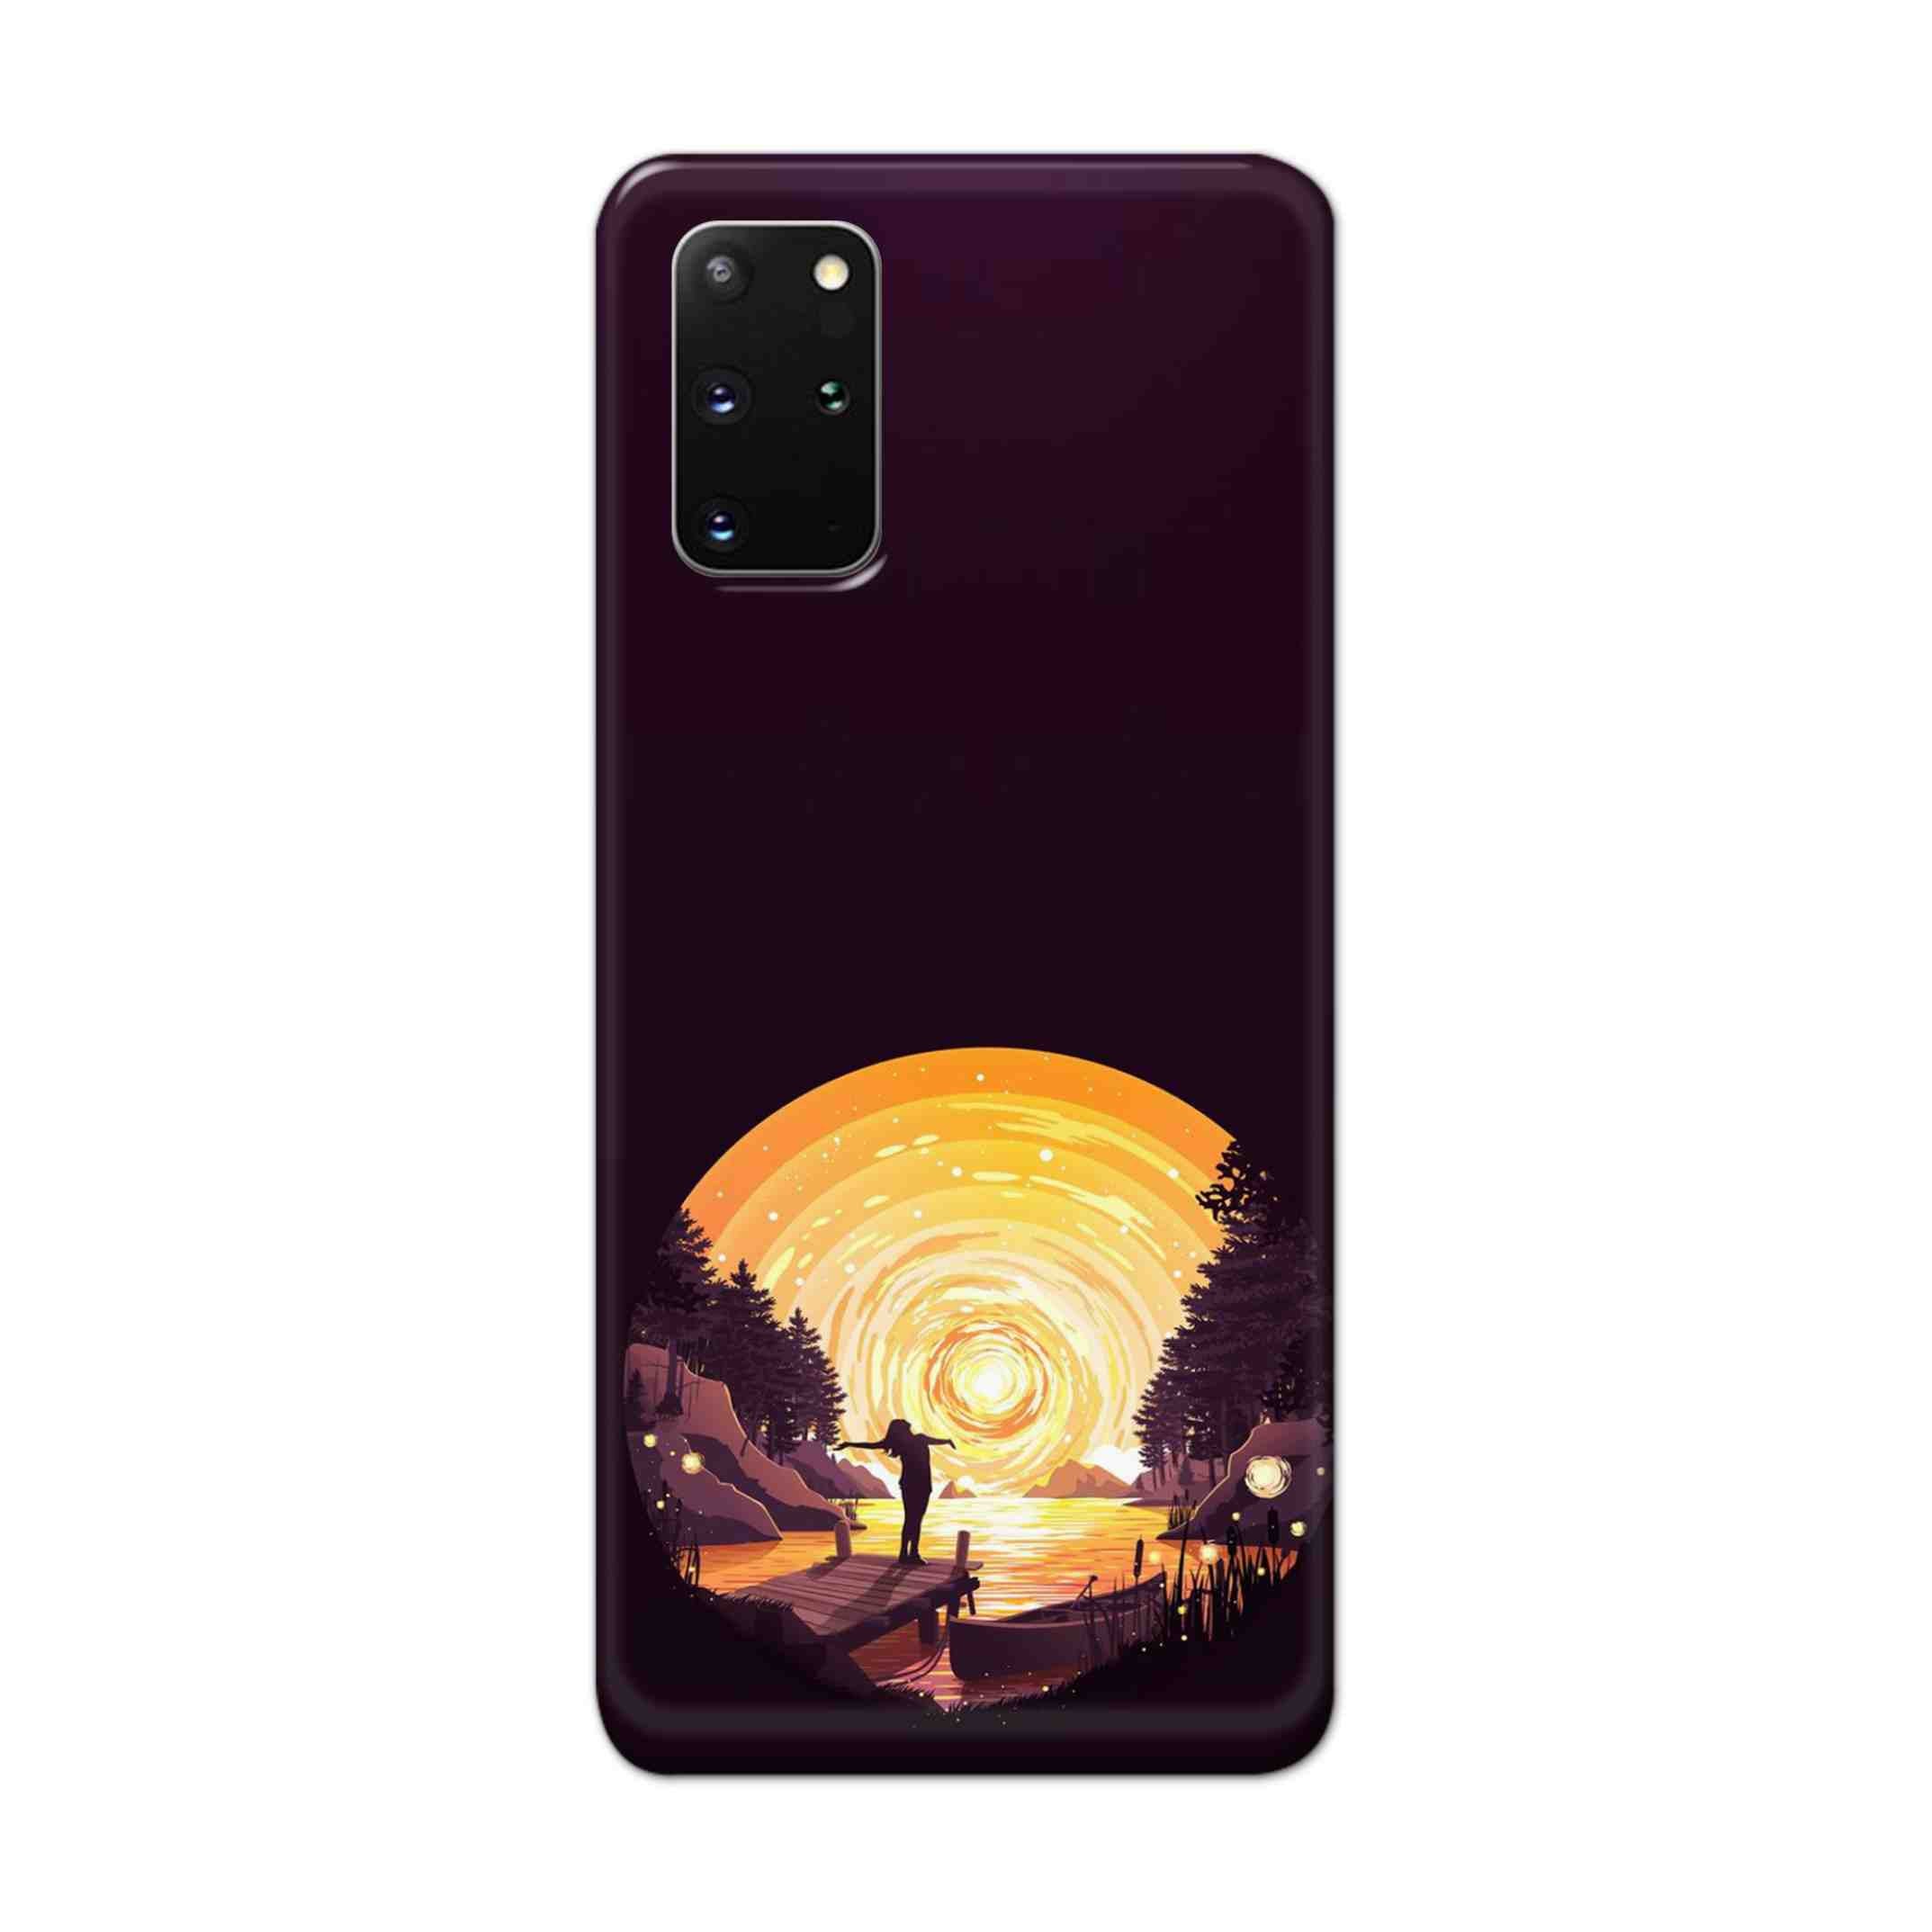 Buy Night Sunrise Hard Back Mobile Phone Case Cover For Samsung Galaxy S20 Plus Online